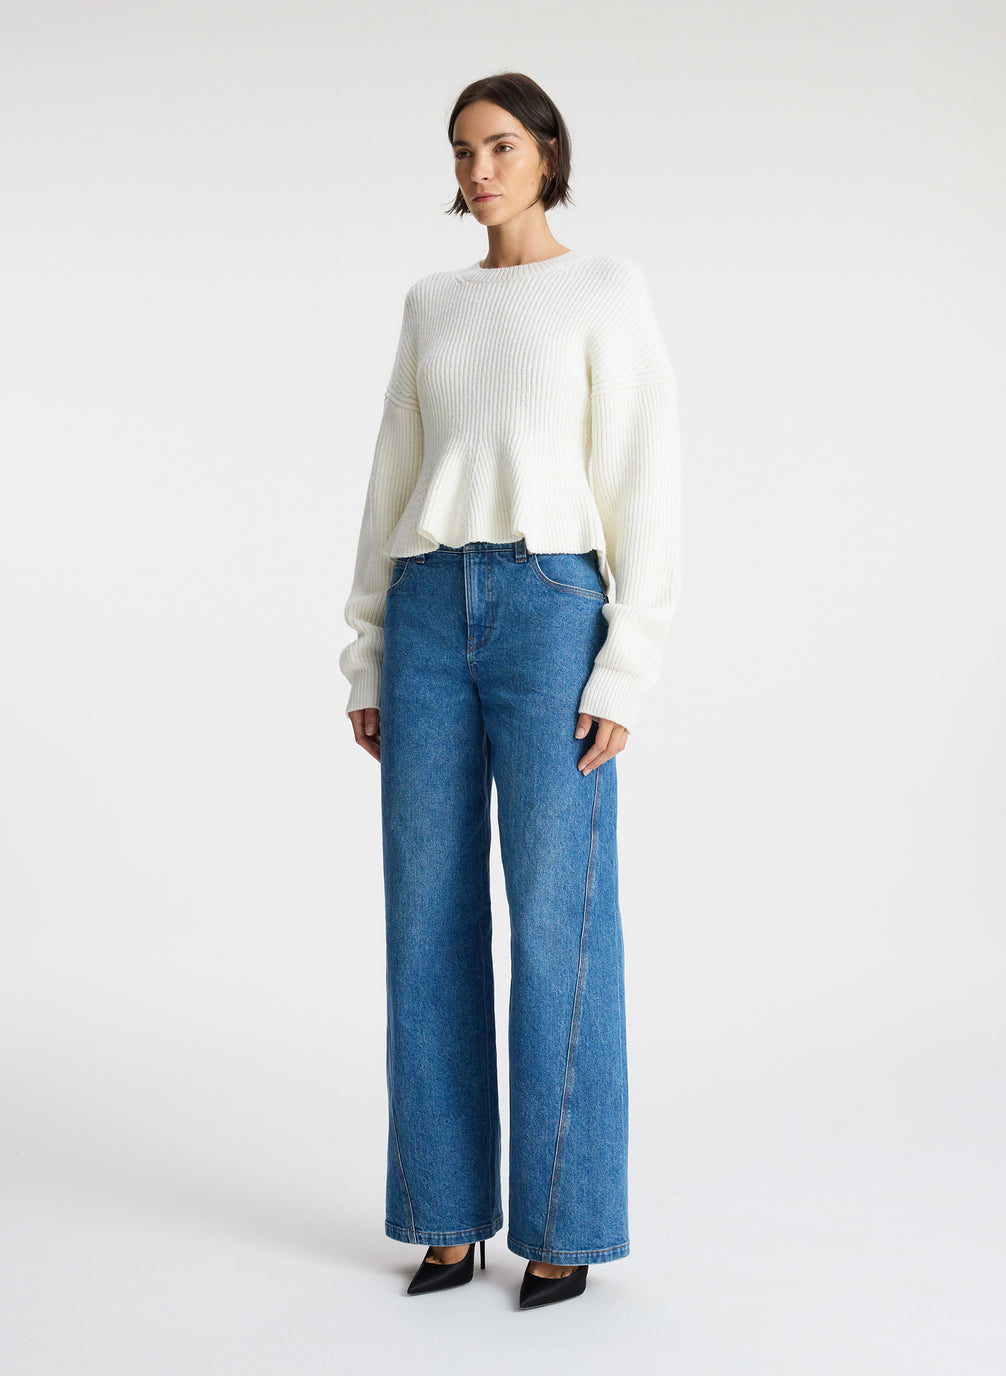 side view of woman wearing white peplum sweater and medium blue wash denim jeans